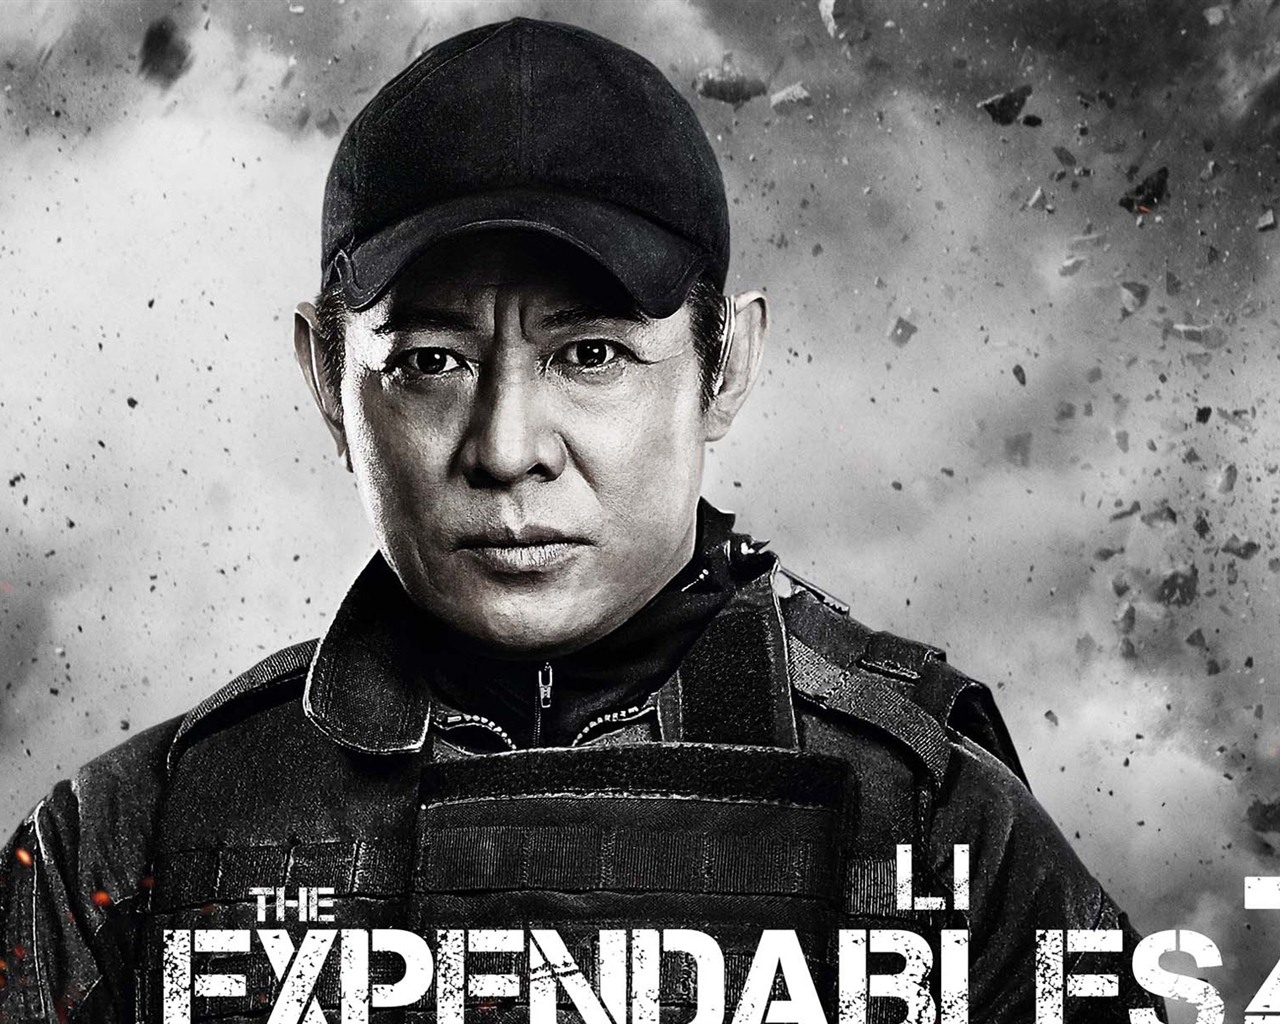 2012 The Expendables 2 敢死队2 高清壁纸16 - 1280x1024